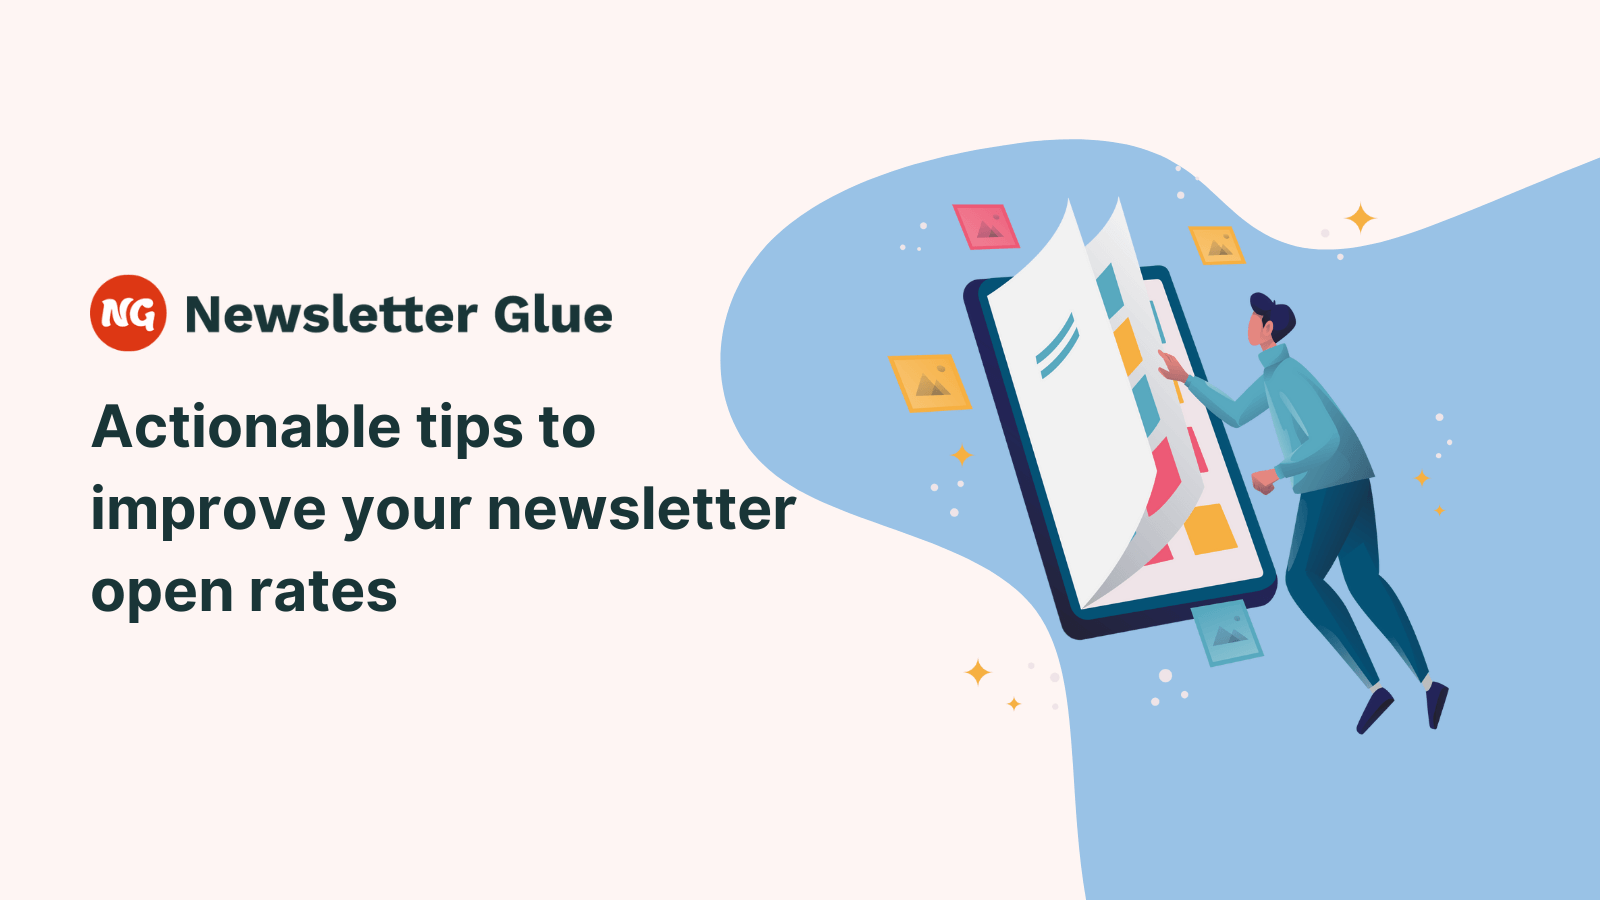 Actionable tips to improve your newsletter open rates